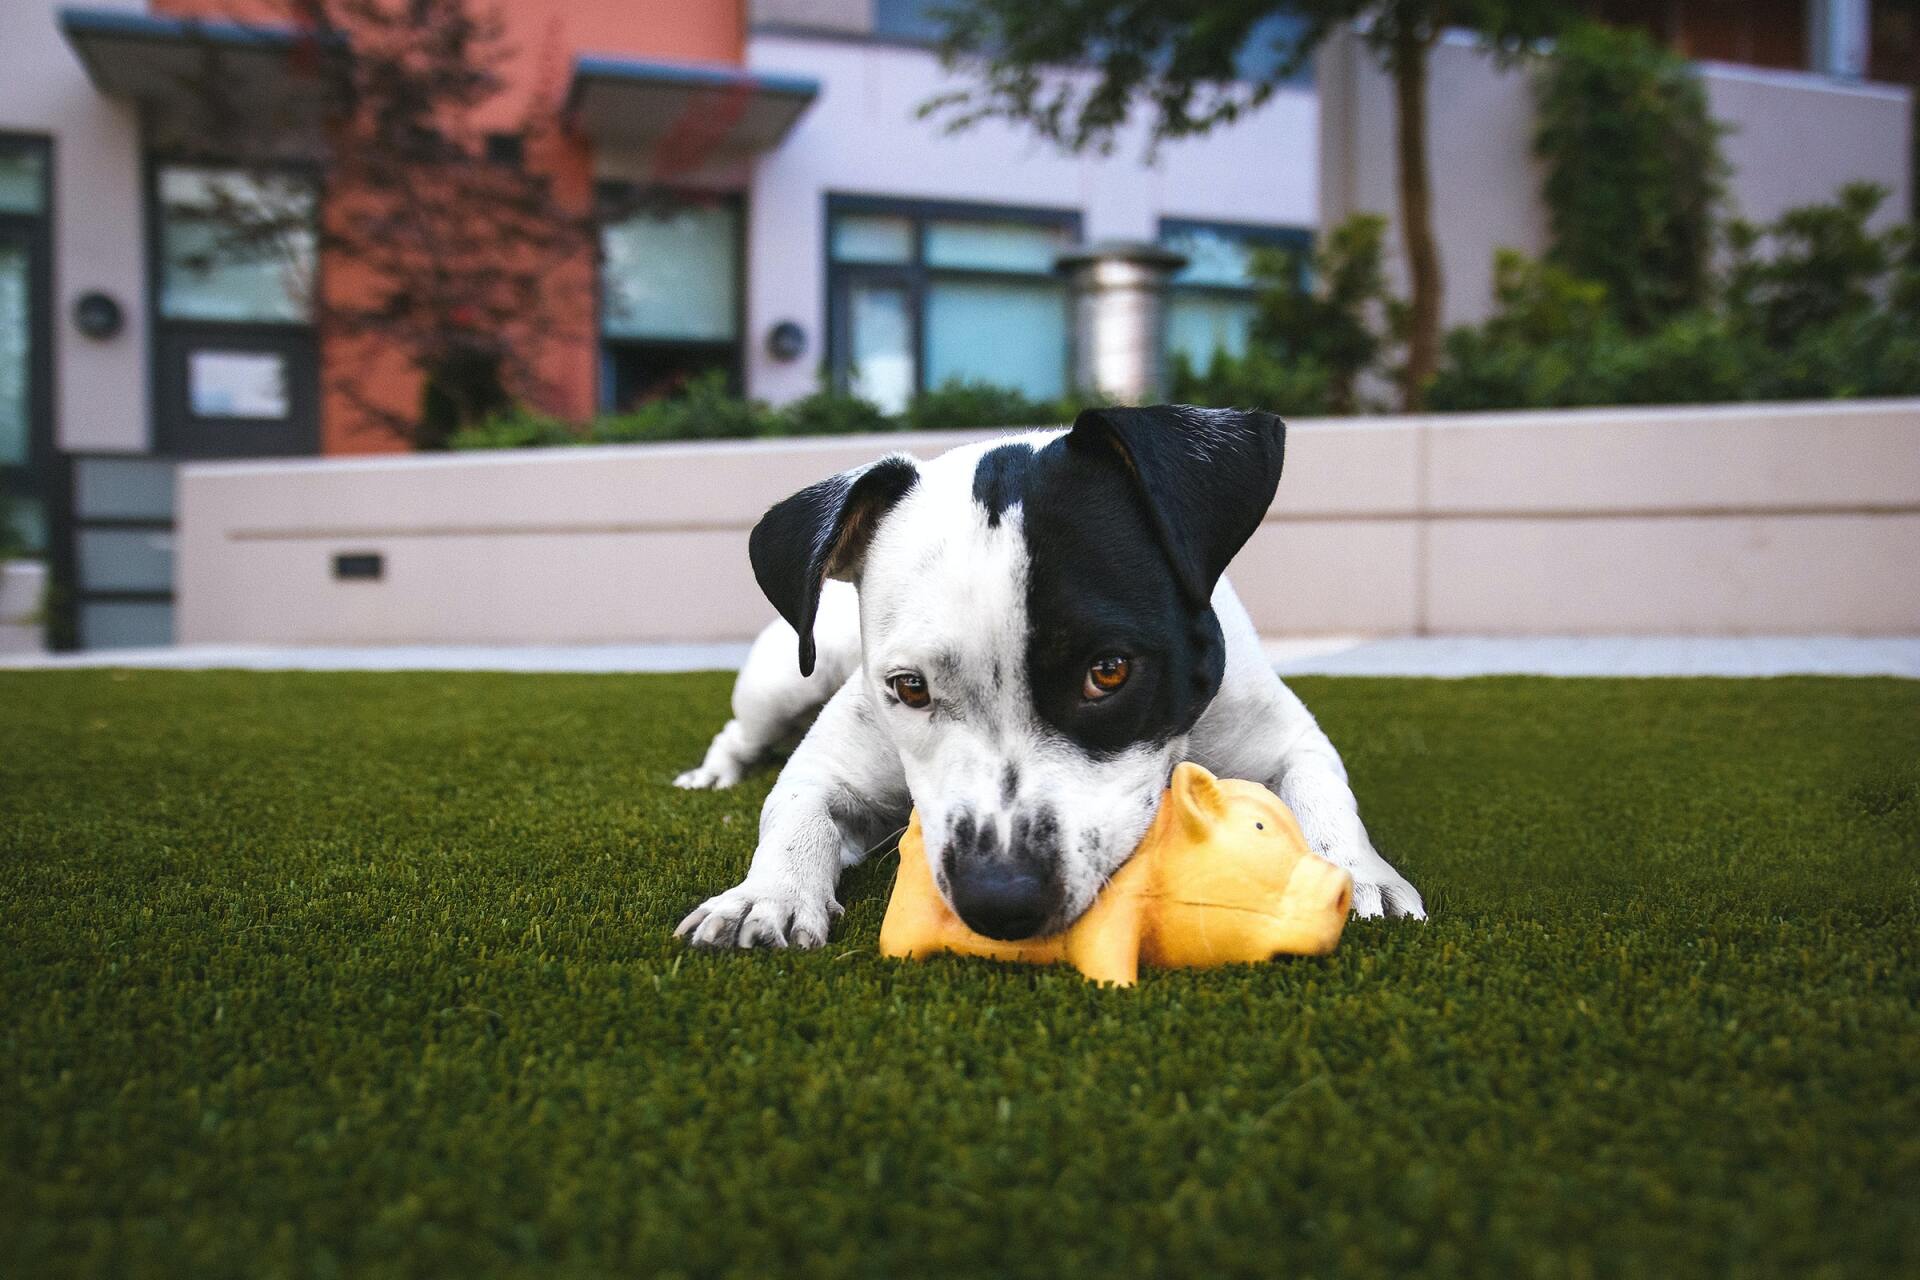 Artificial grass stays clean and doesn't leave a mess for this dog to lick off its body or for the owner to clean.